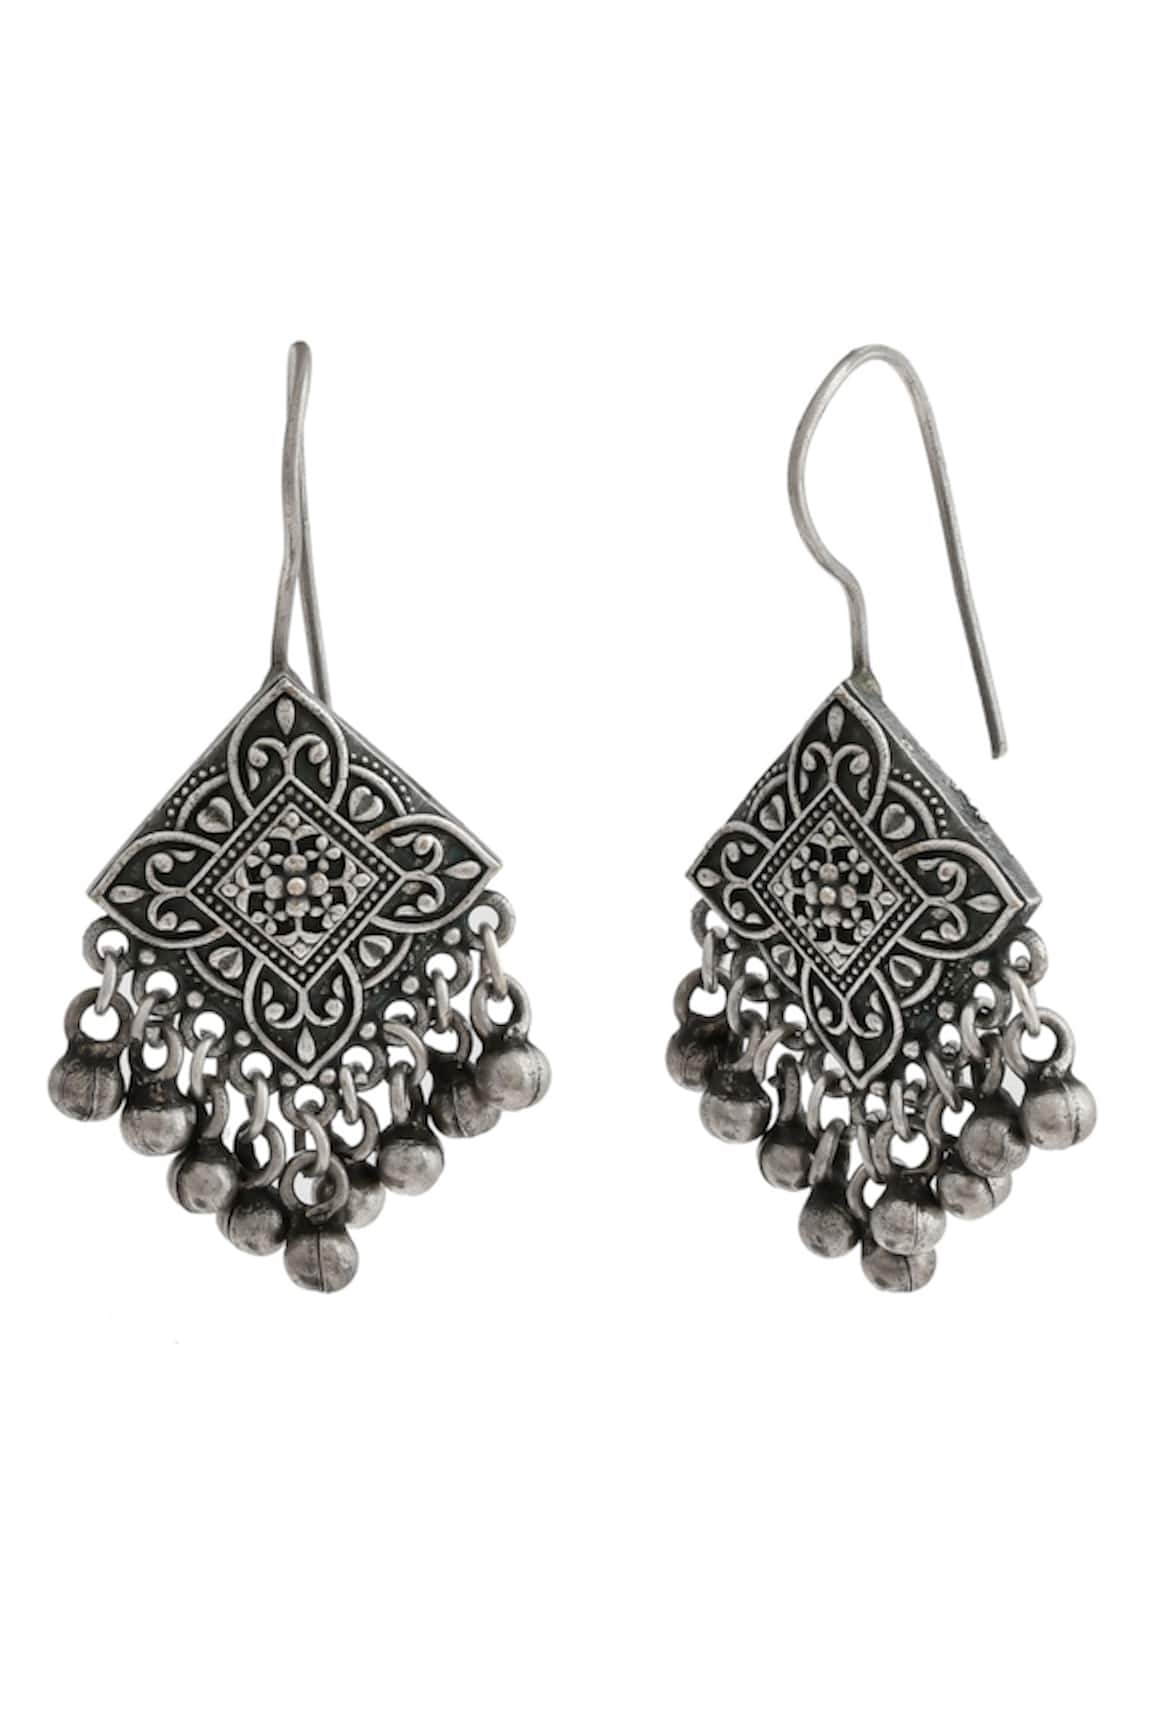 Kayaa Elegant Gold Oxidised Earrings In Square Shape With Jhumka For W